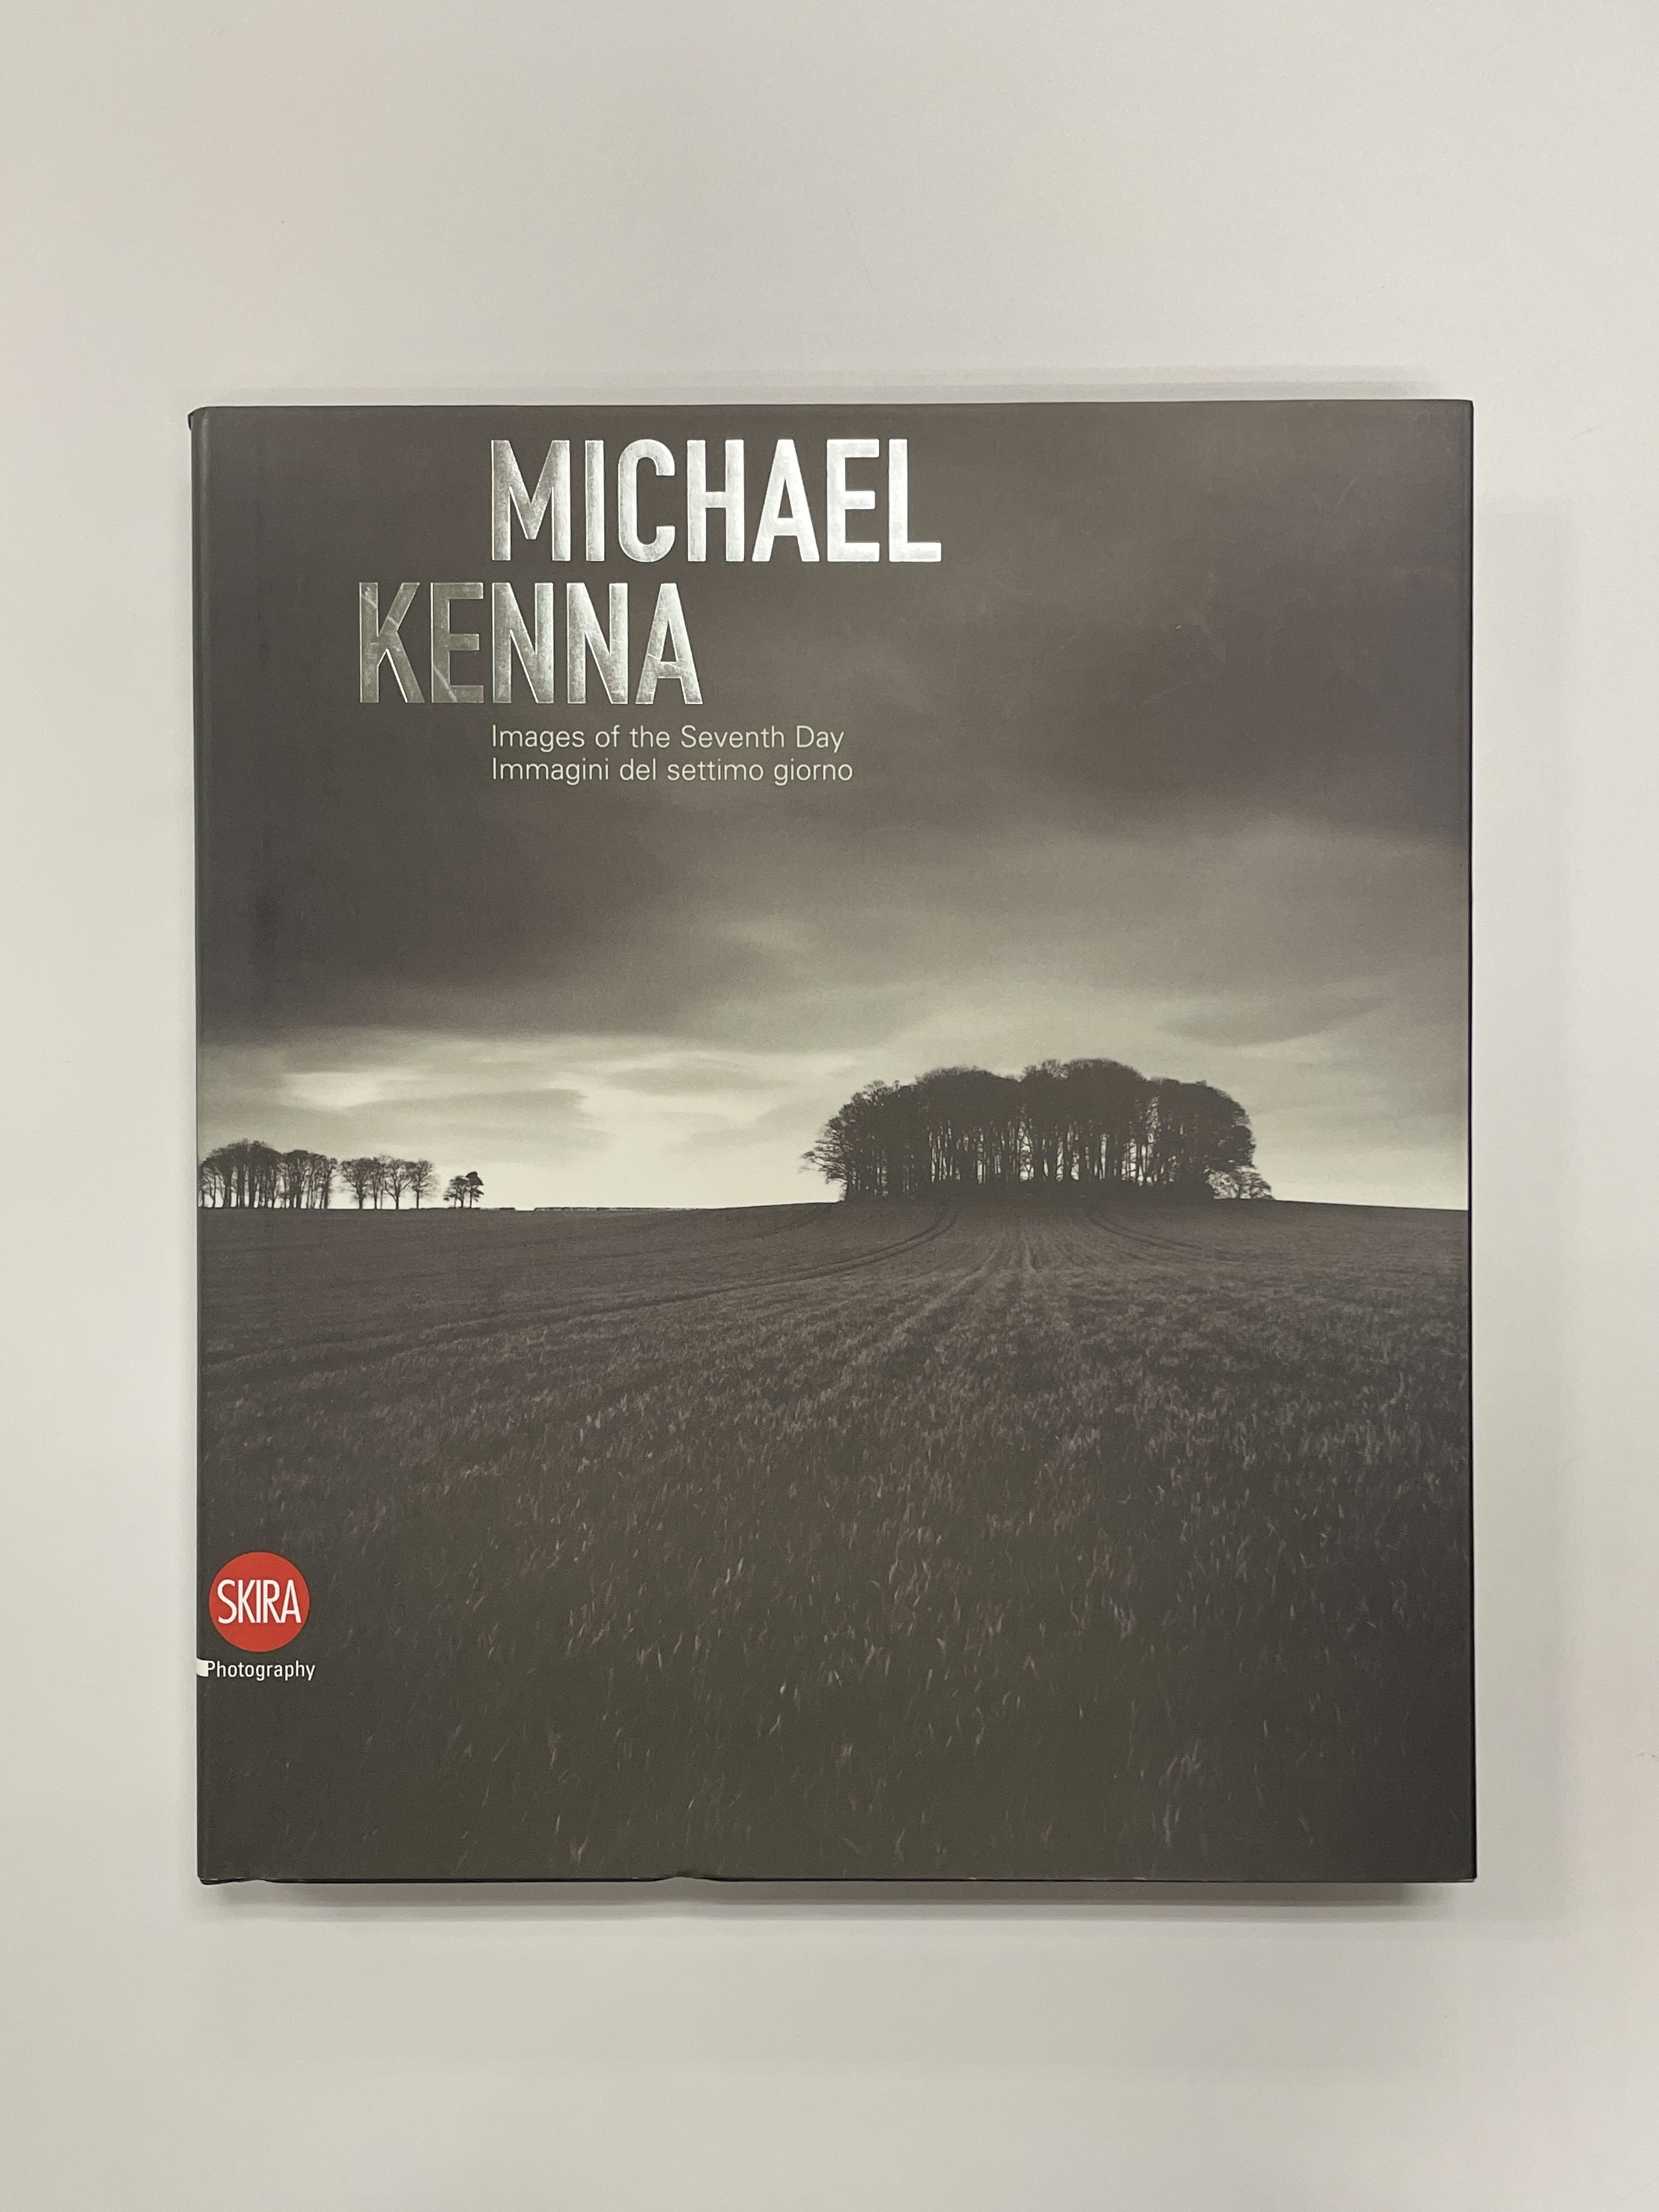 PHOTOGRAPHY BOOKS - MICHAEL KENNA - Image 4 of 9